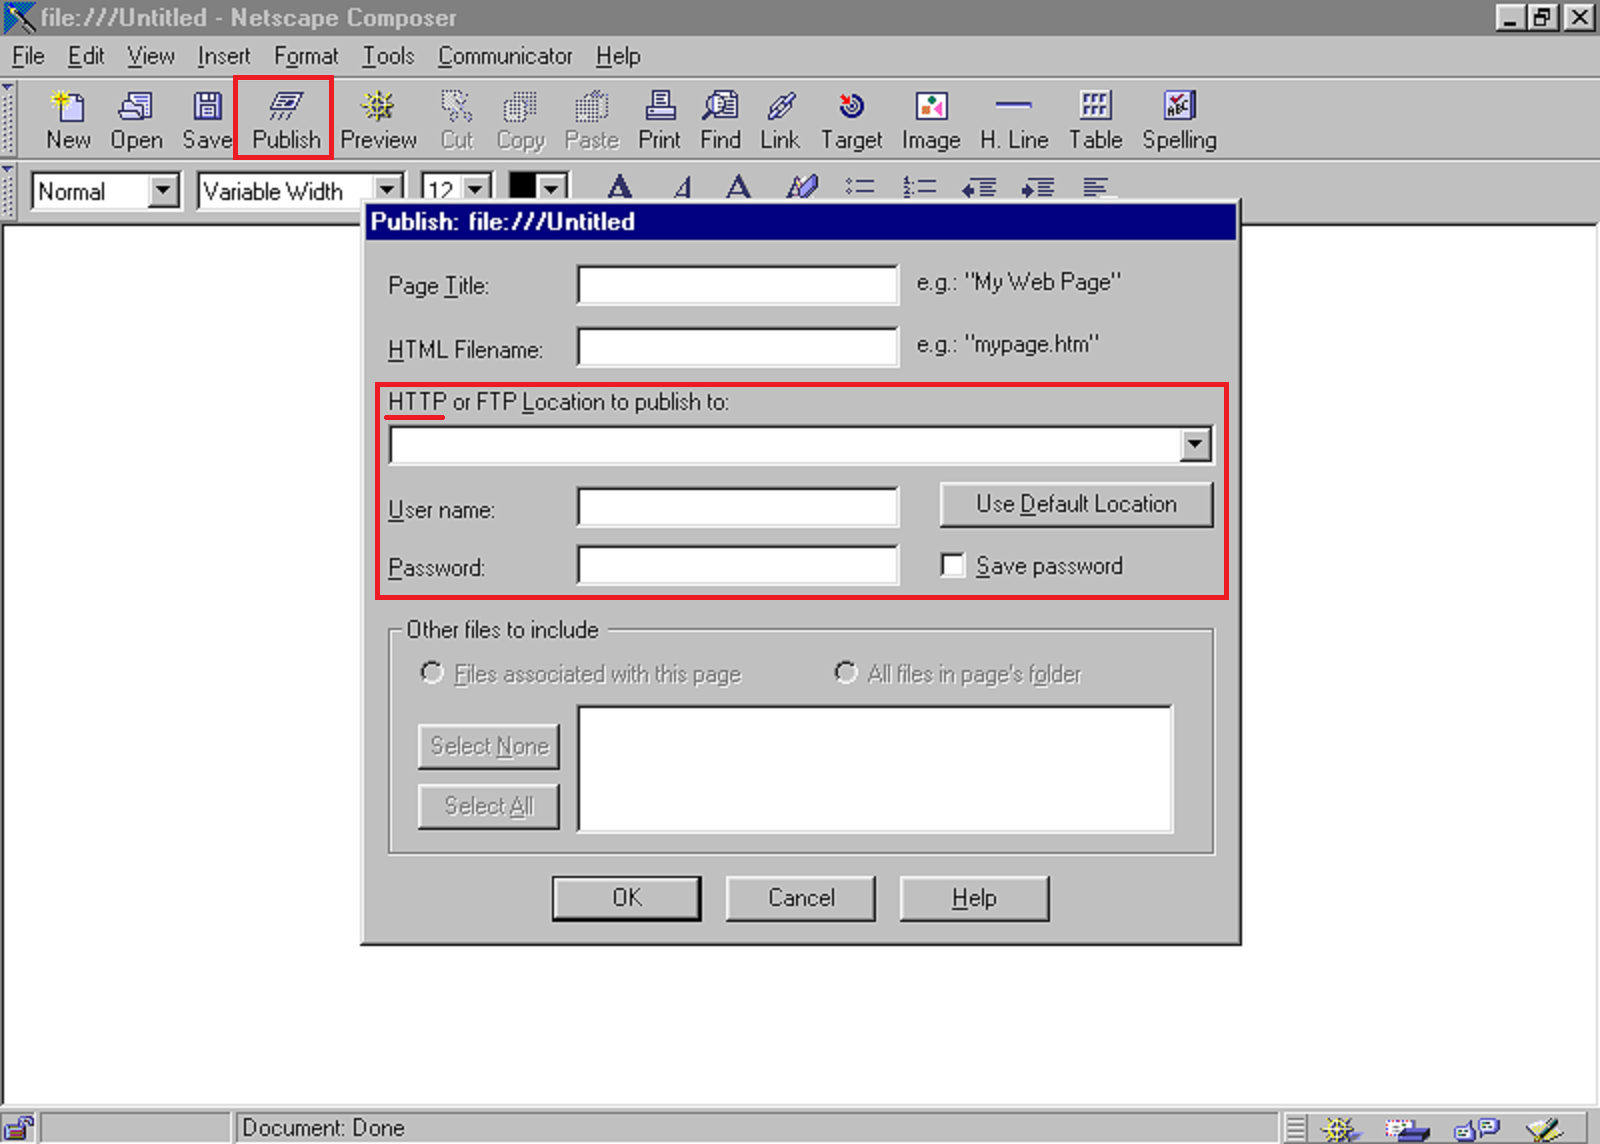 Screenshot of Composer in Netscape 4